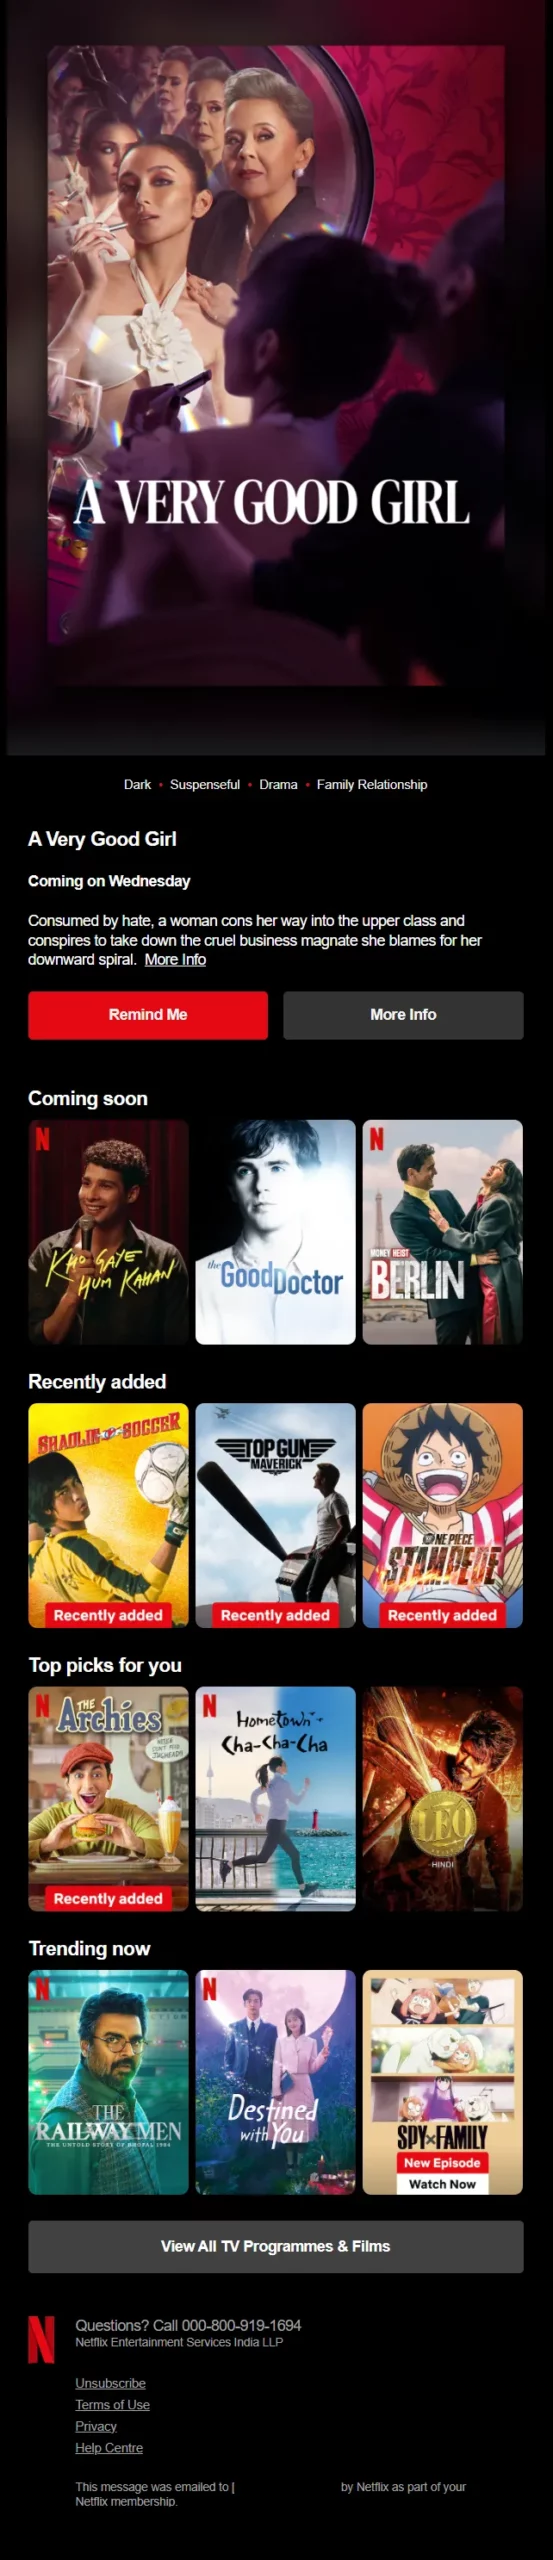 netflix - upcoming shows email